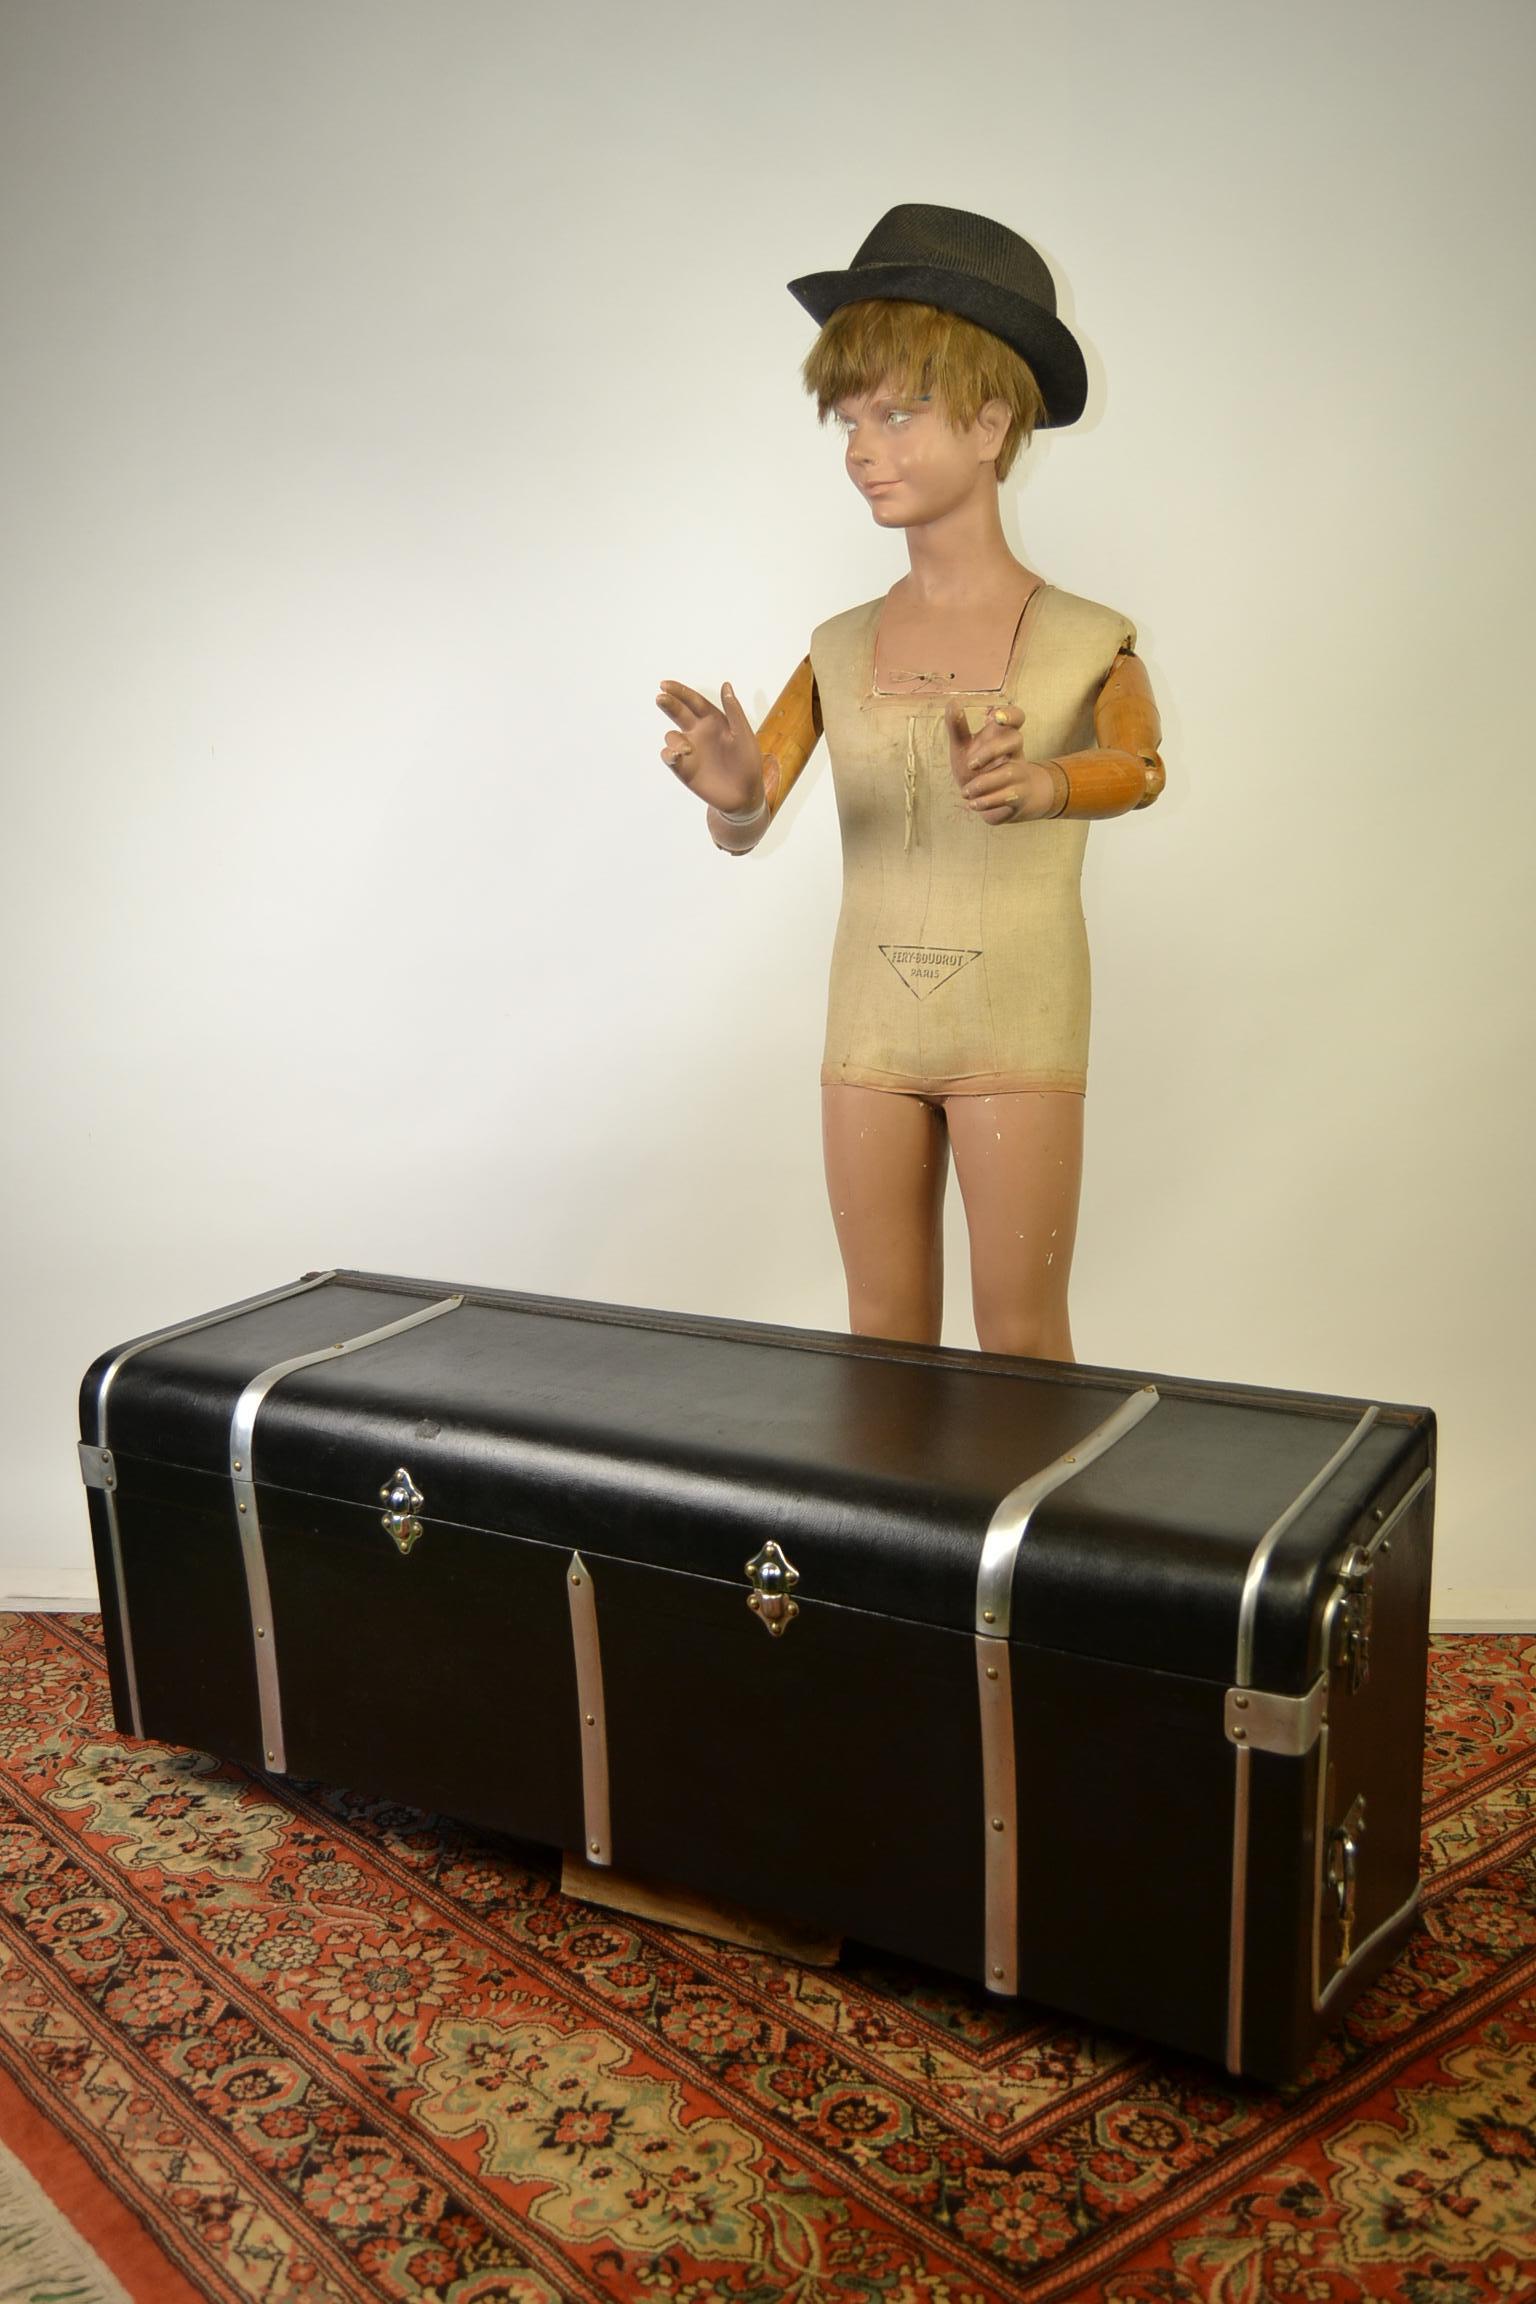 Art Deco Oldtimer Car Trunk - car boot - Classic car trunk - luggage trunk - travelling car trunk. These external car trunks were used at the back of early automobiles. 

It's made of wood covered with black lacquered canvas. 
This black trunk -